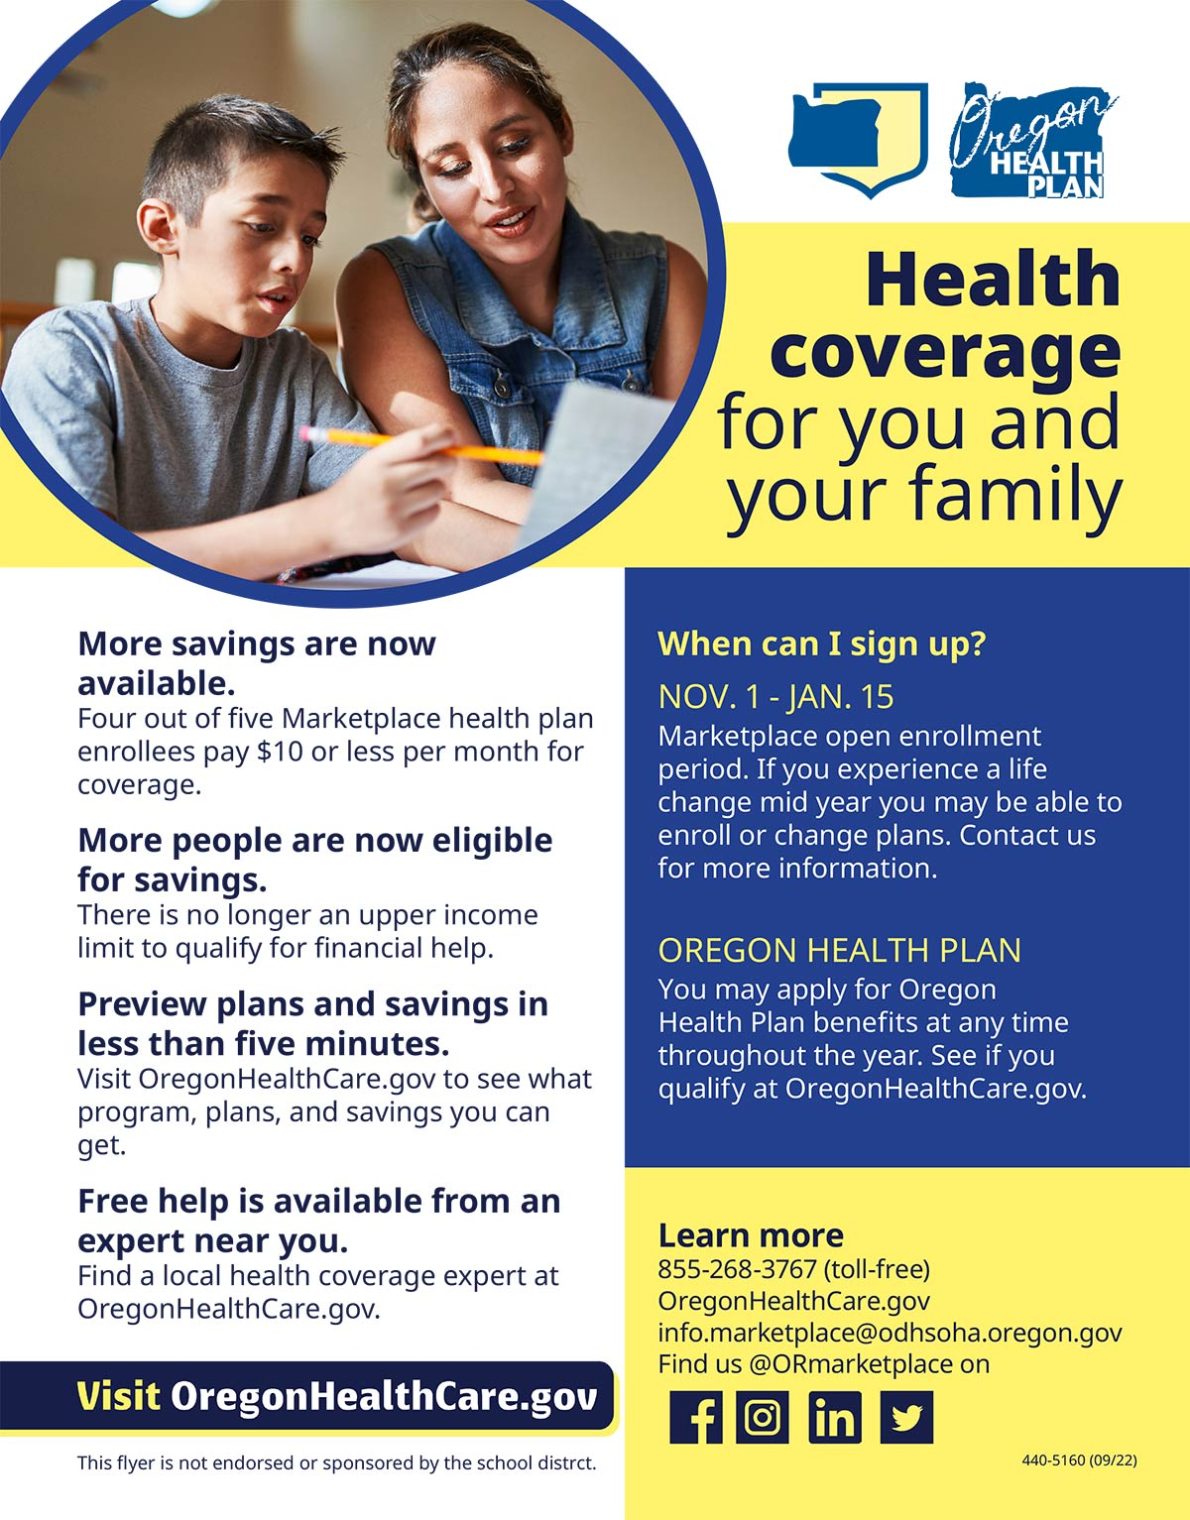 Oregon Health Plan: Health Coverage For You and Your Family